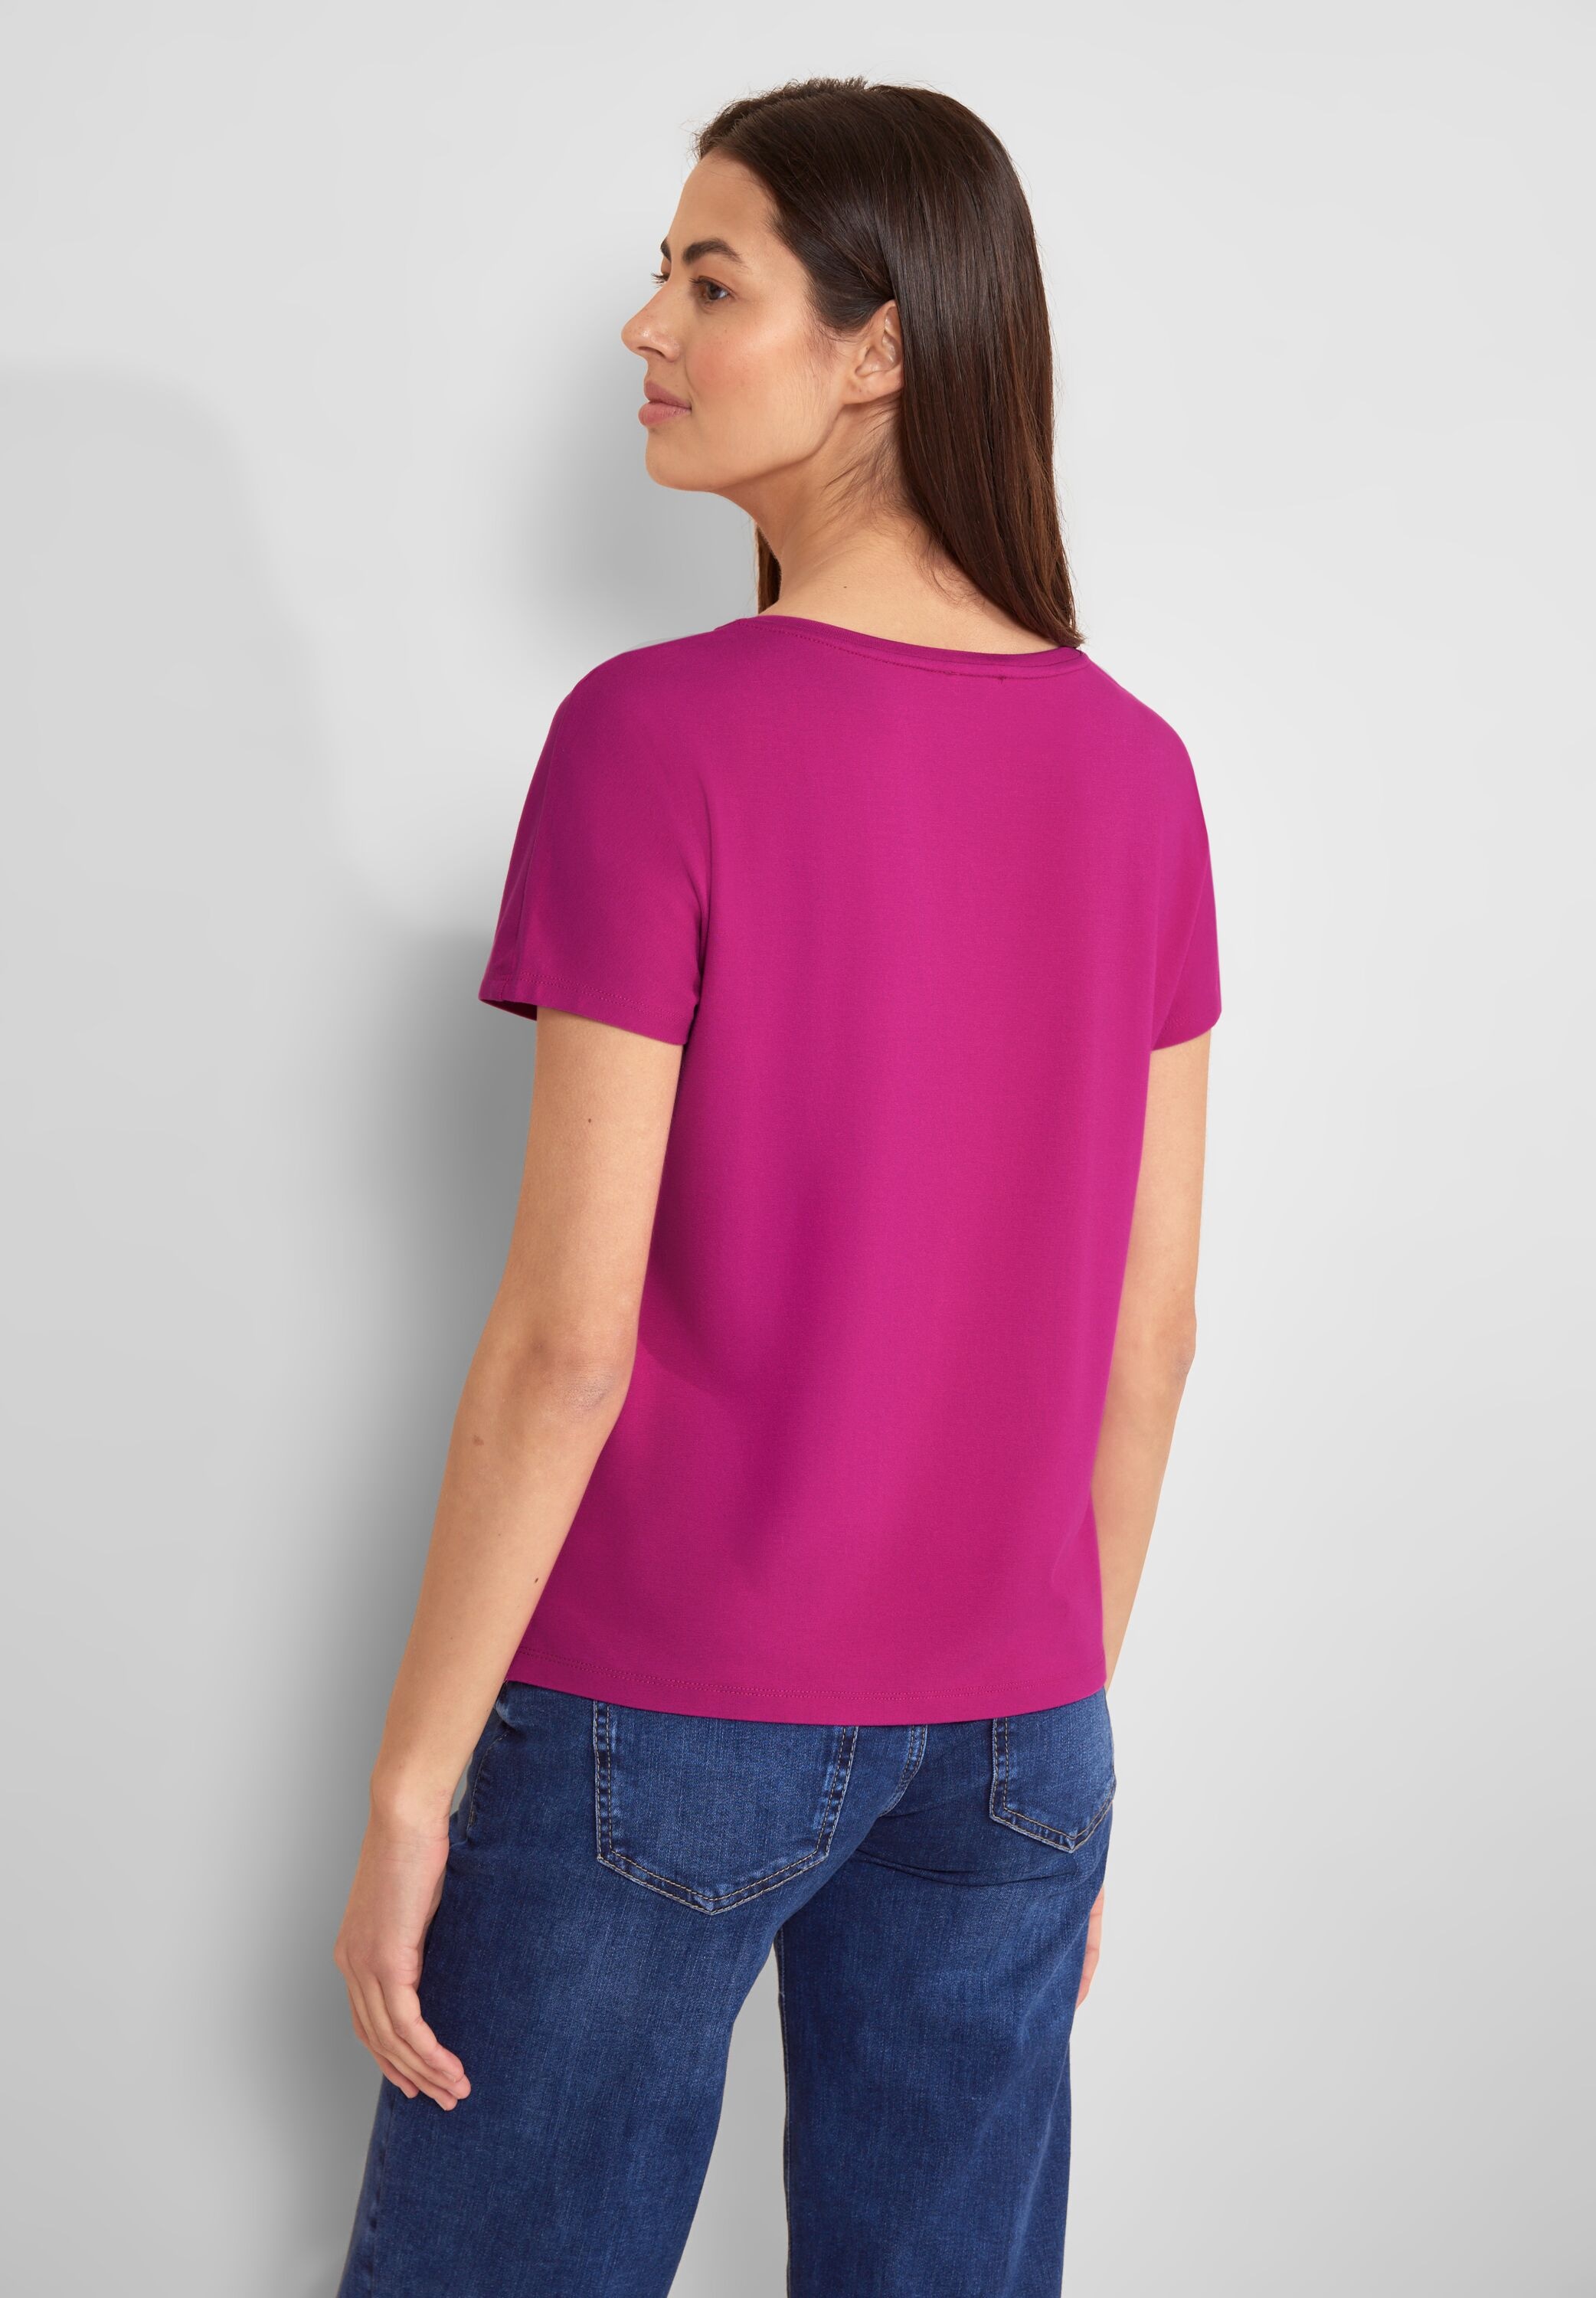 STREET ONE Shirttop, in Unifarbe